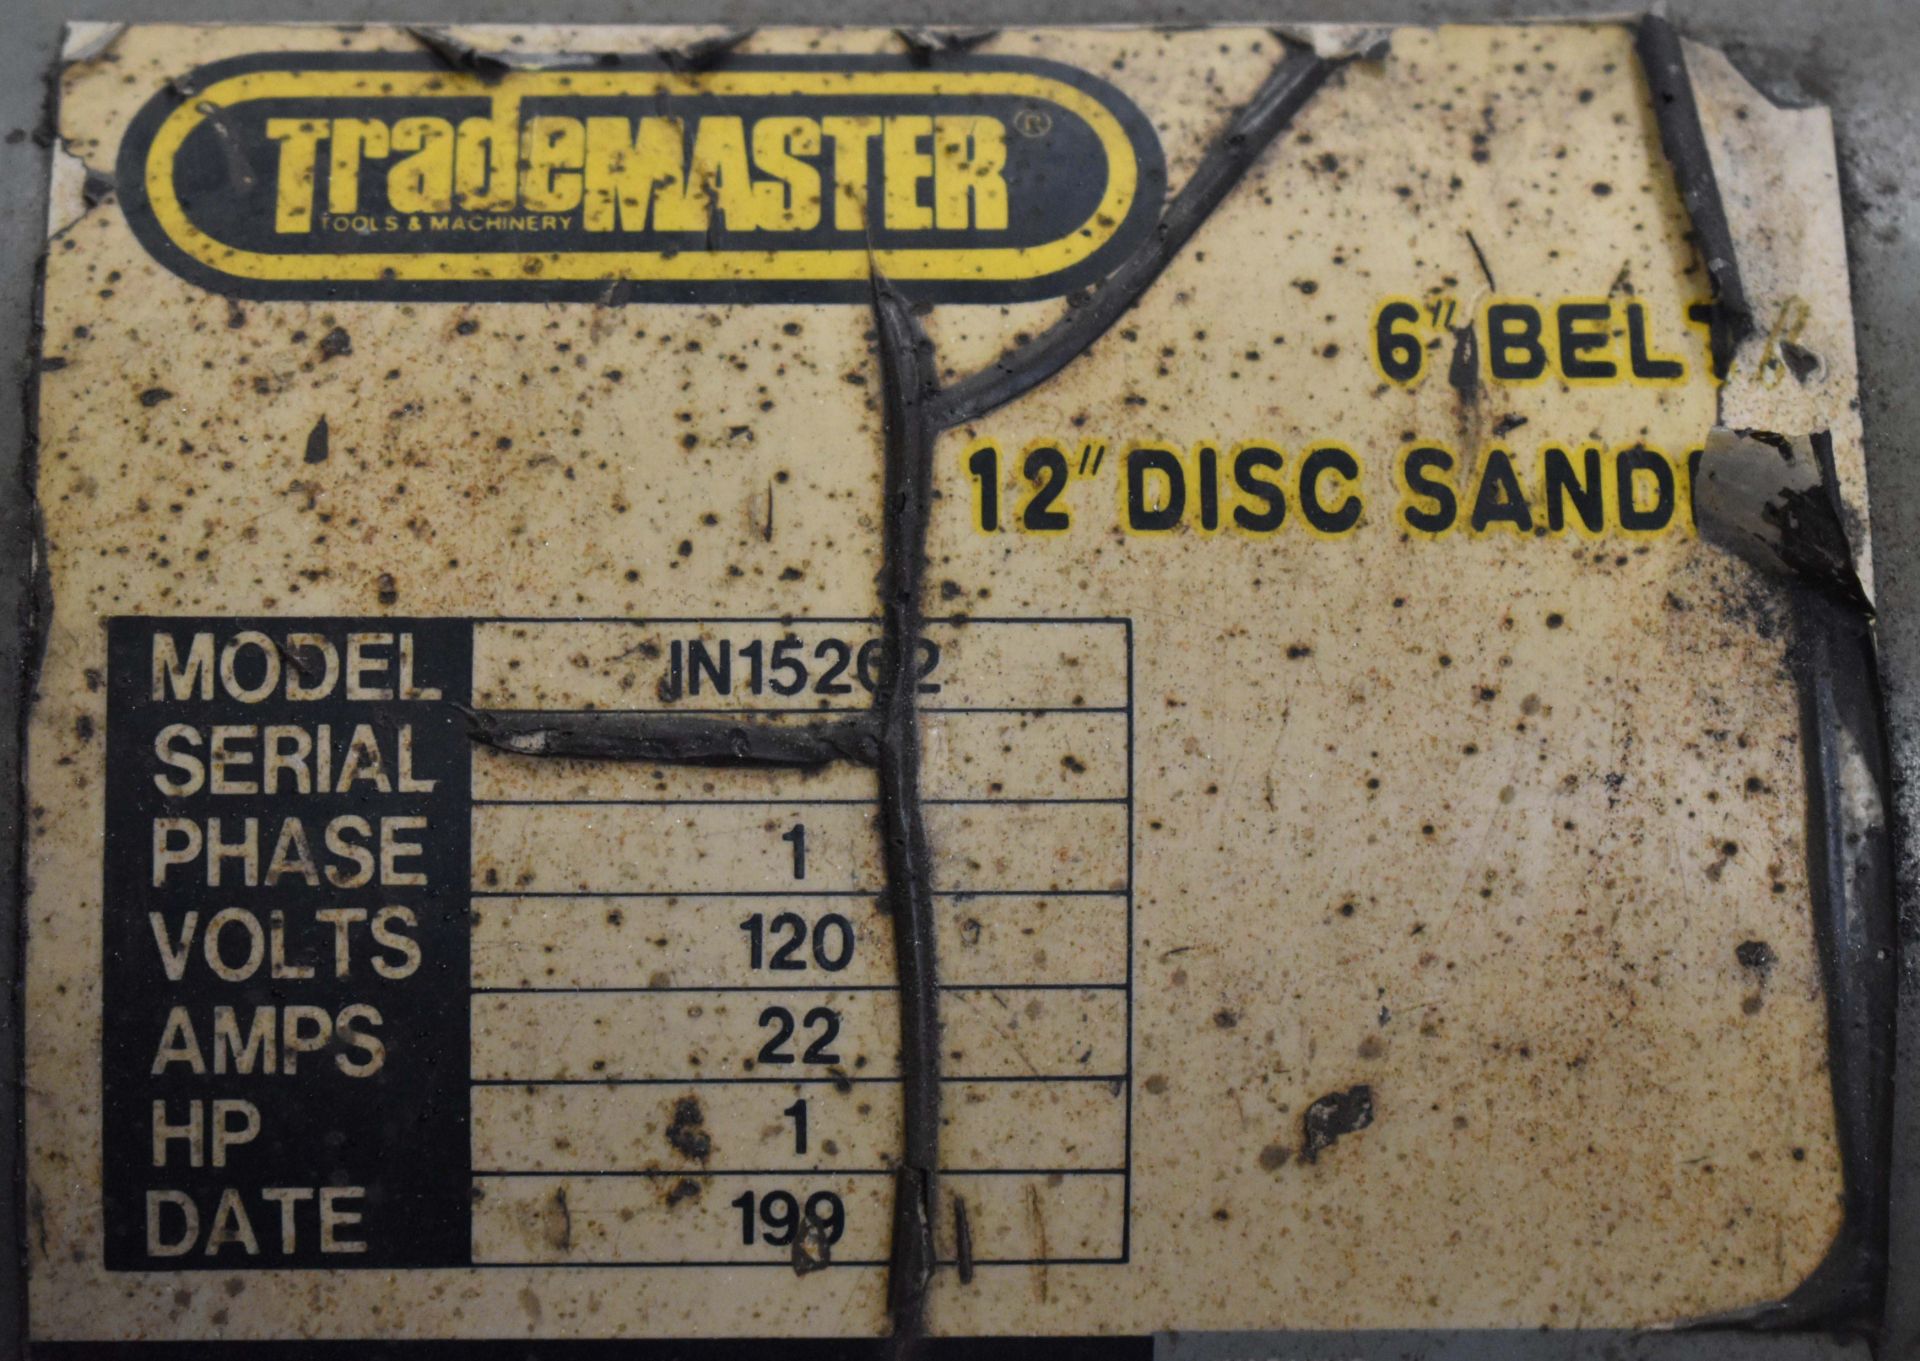 TRADEMASTER IN15202 BENCH-TYPE COMBINATION SANDER WITH 6" BELT, 12" DISC, S/N: N/A - Image 4 of 4